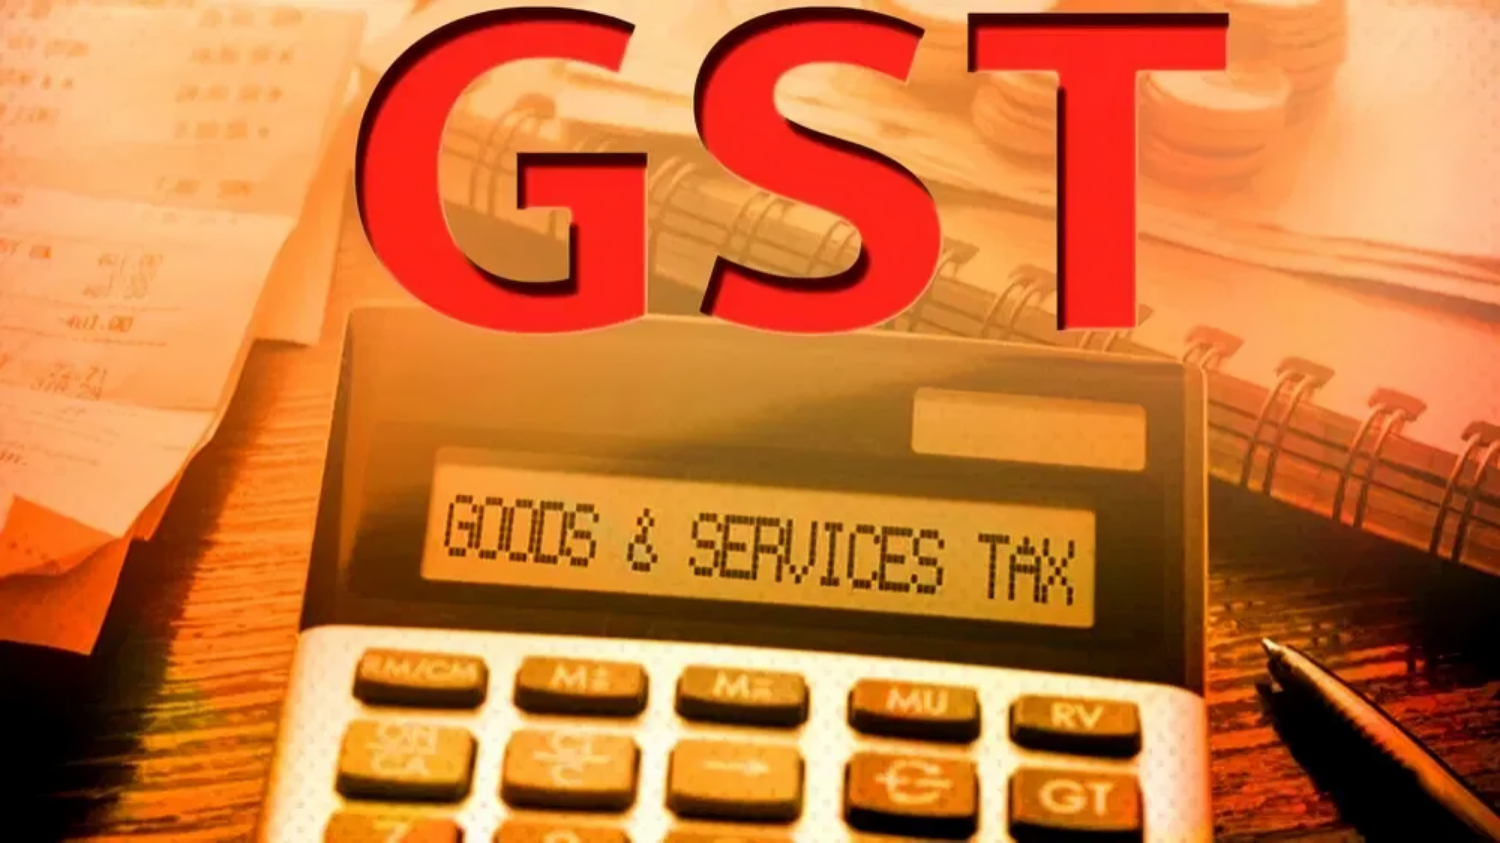 Picture of Record GST revenue, Rs 1.78 lakh crore in March, GST revenue to reach Rs 20.14 lakh crore in fiscal year